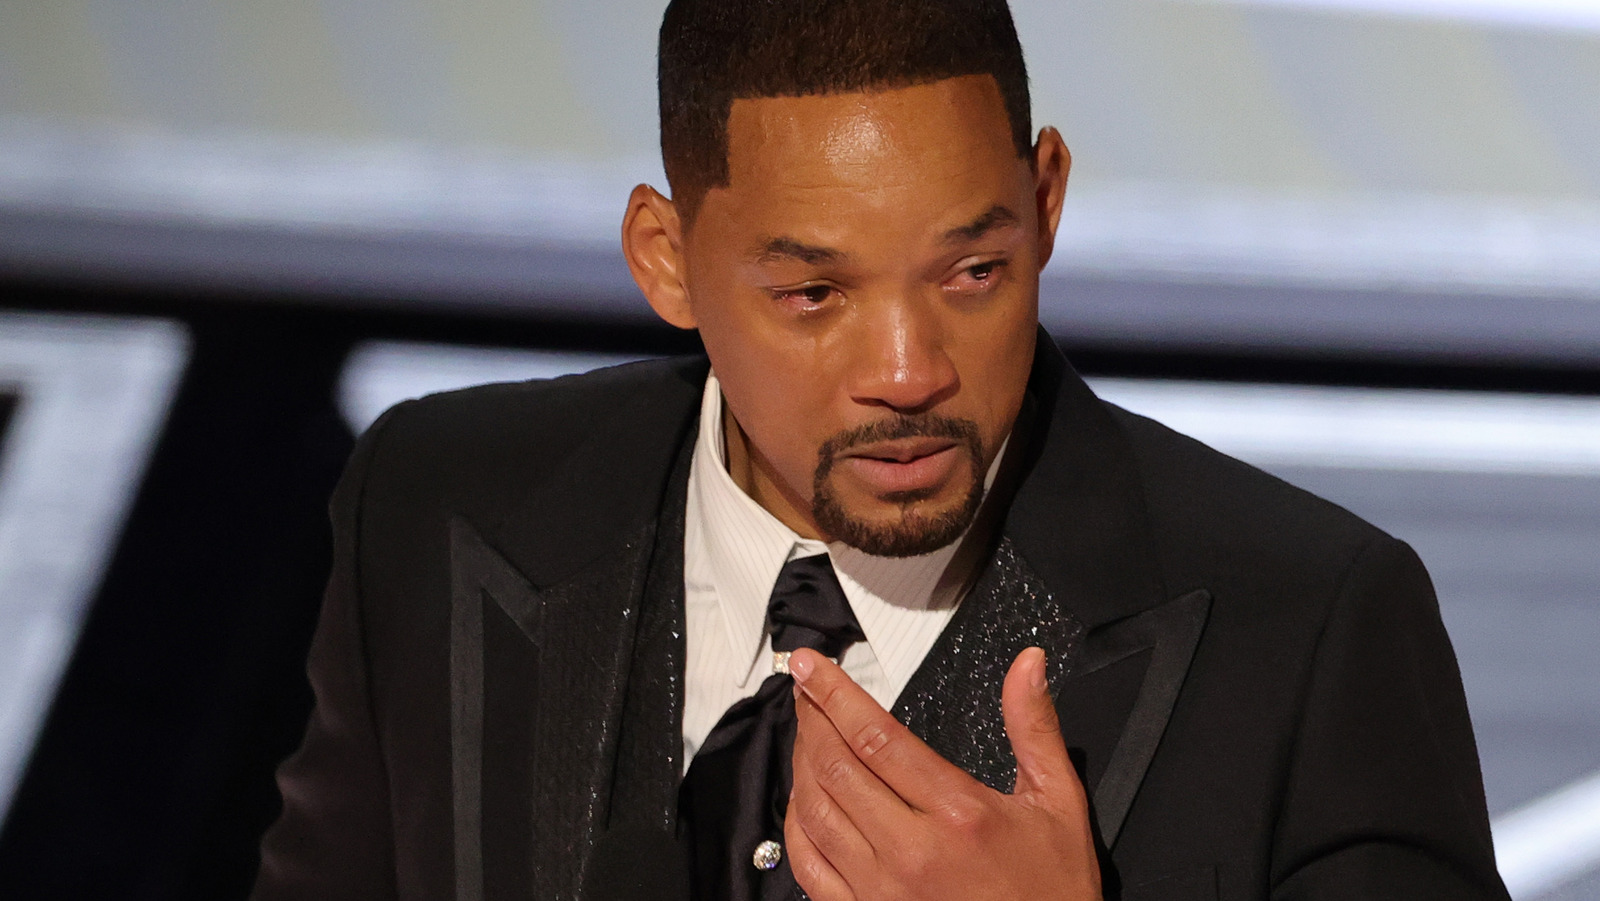 #Will Smith Has Resigned From The Academy Following The Oscars